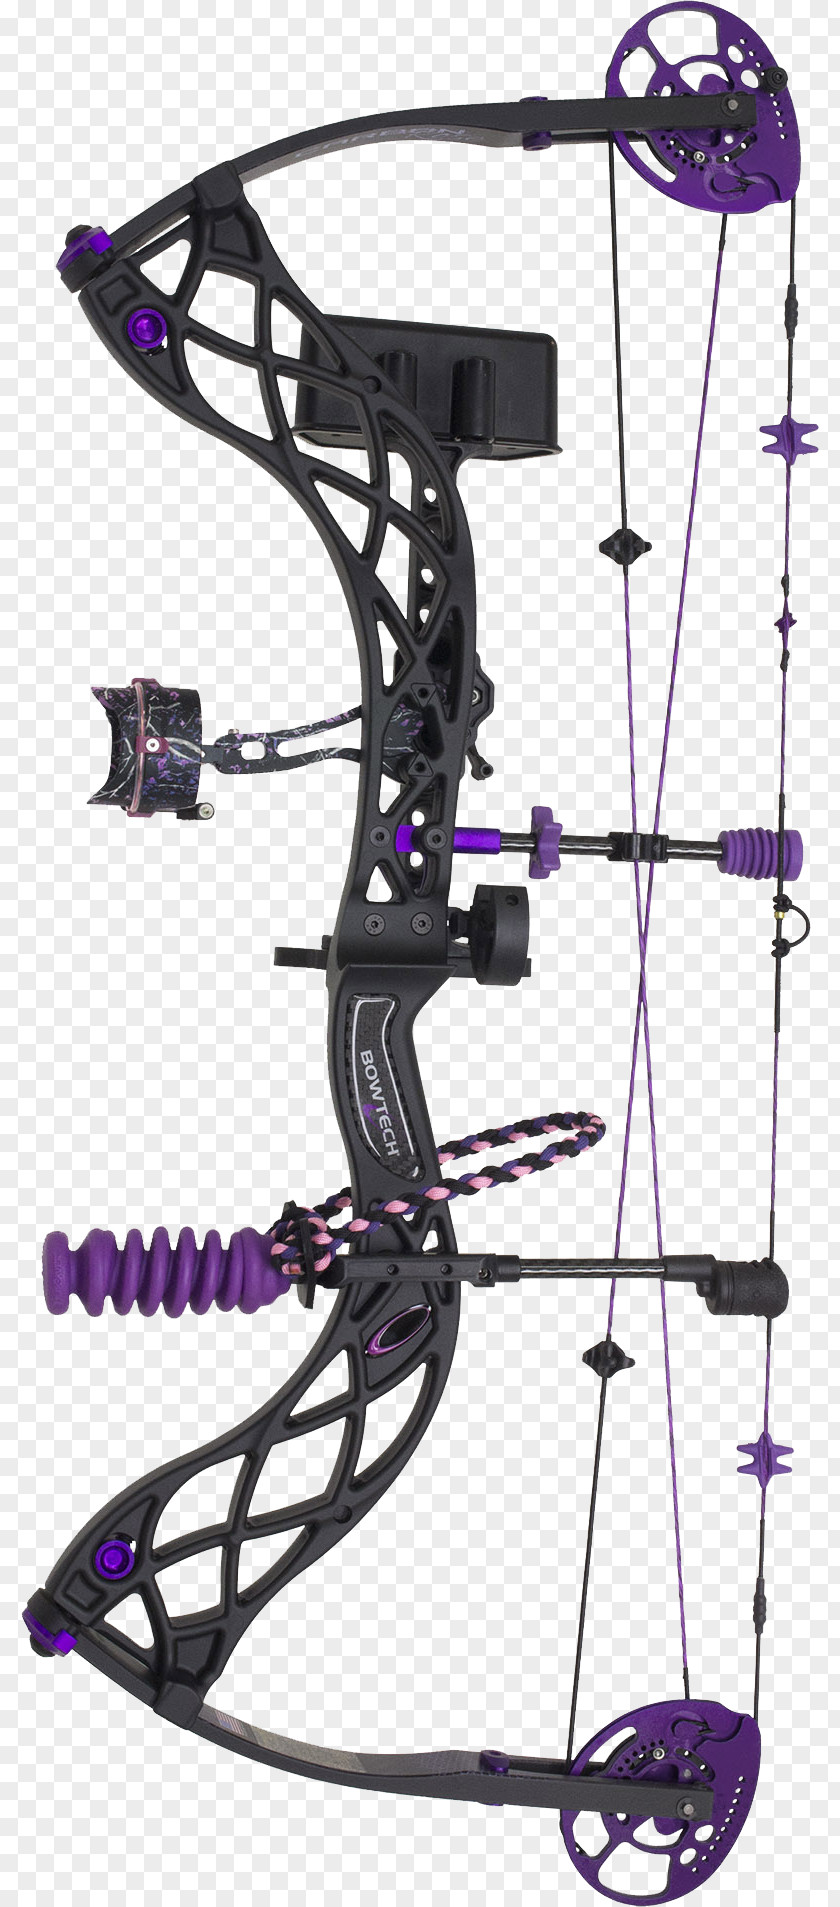 Bow Package BowTech Archery Bowhunting Compound Bows And Arrow PNG